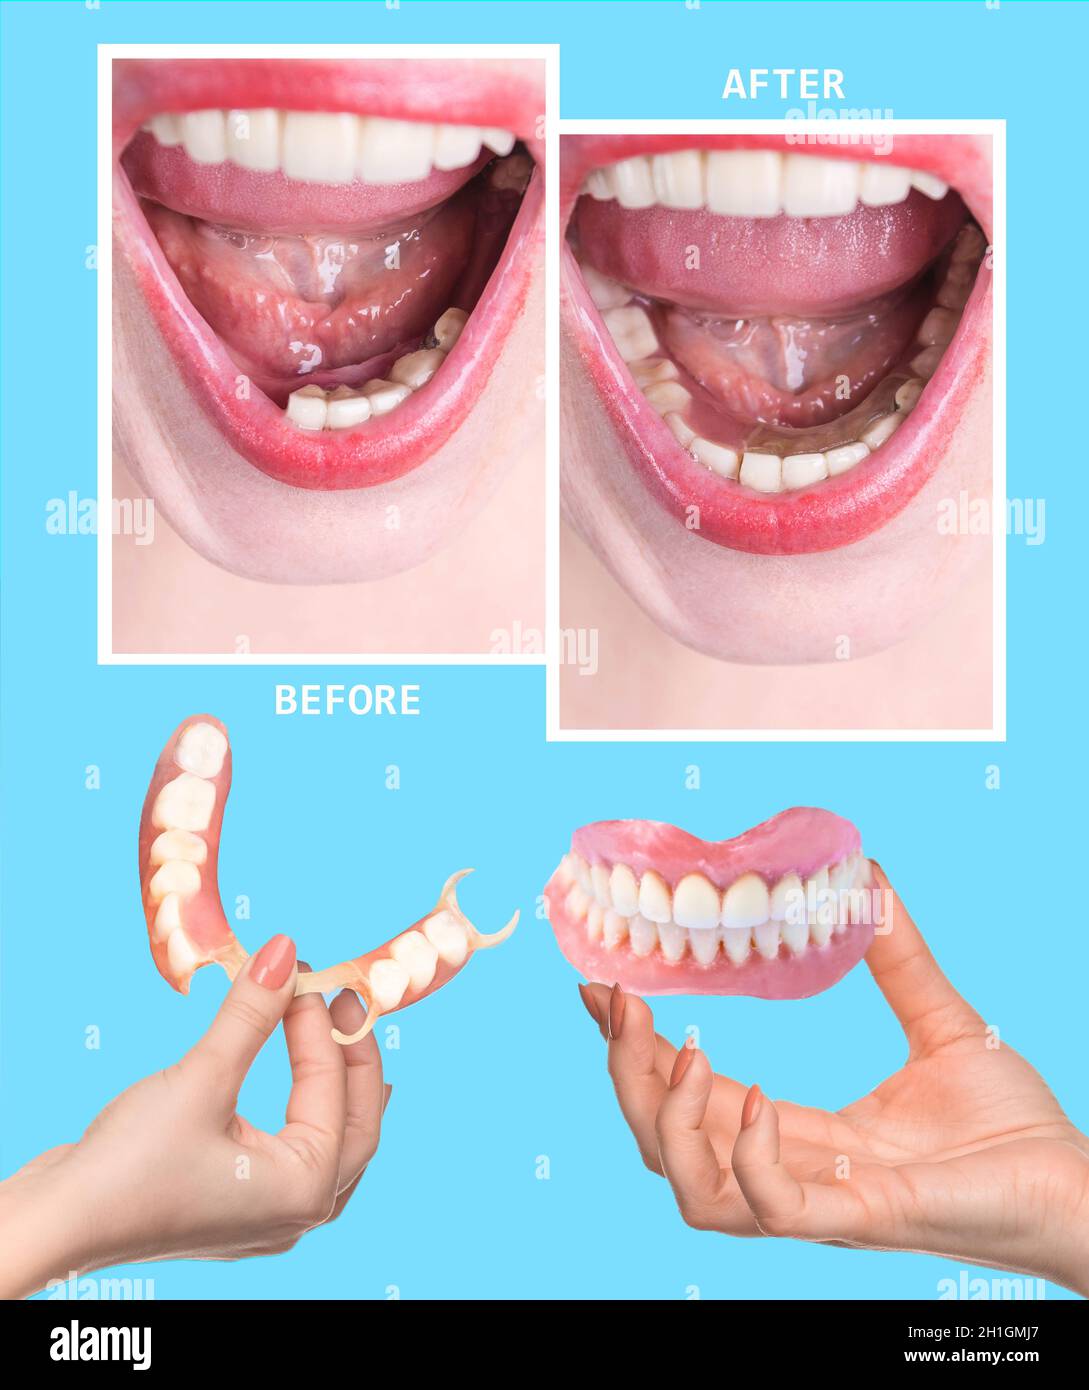 Dental rehabilitation with lower flexible nylon denture, before and after treatment. Removable dentures flexible, devoid of nylon, hypoallergenic exem Stock Photo